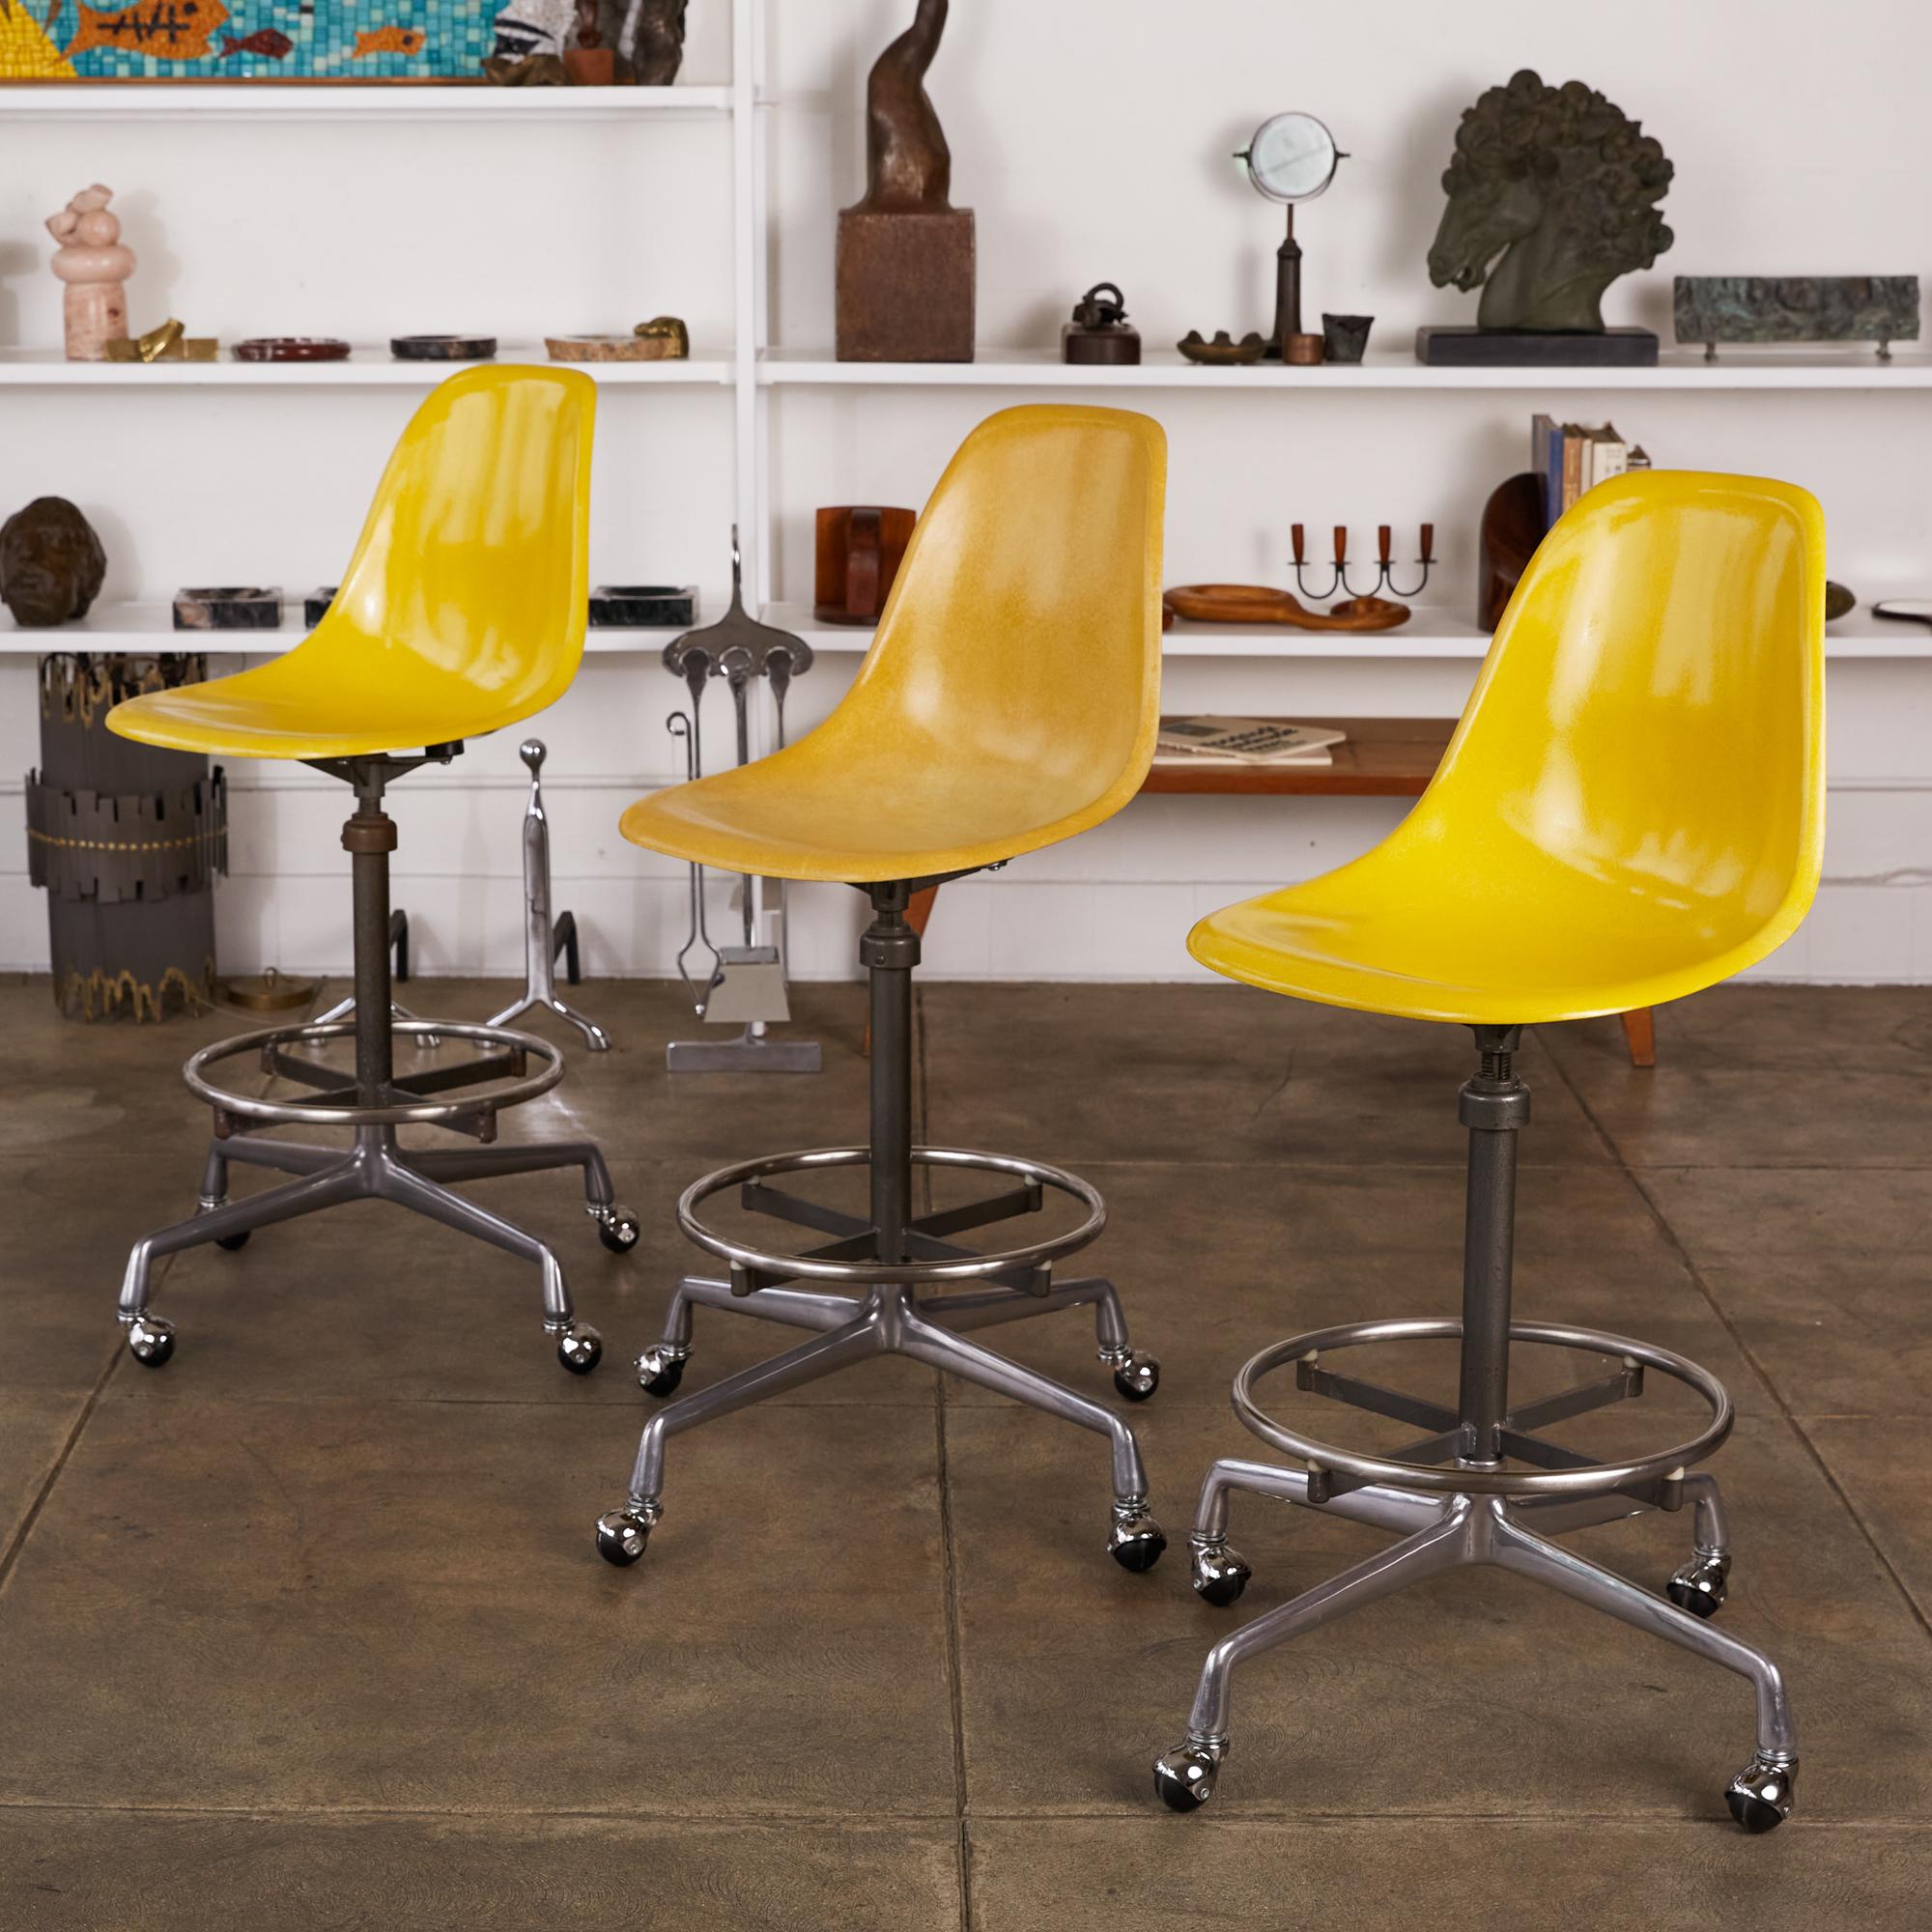 Set of three swiveling stools by Charles and Ray Eames for Herman Miller, circa 1975. The stools feature bright taxi cab yellow fiberglass shell seats that sit atop a height adjustable stem. The stools can be used for an office task chair or as a